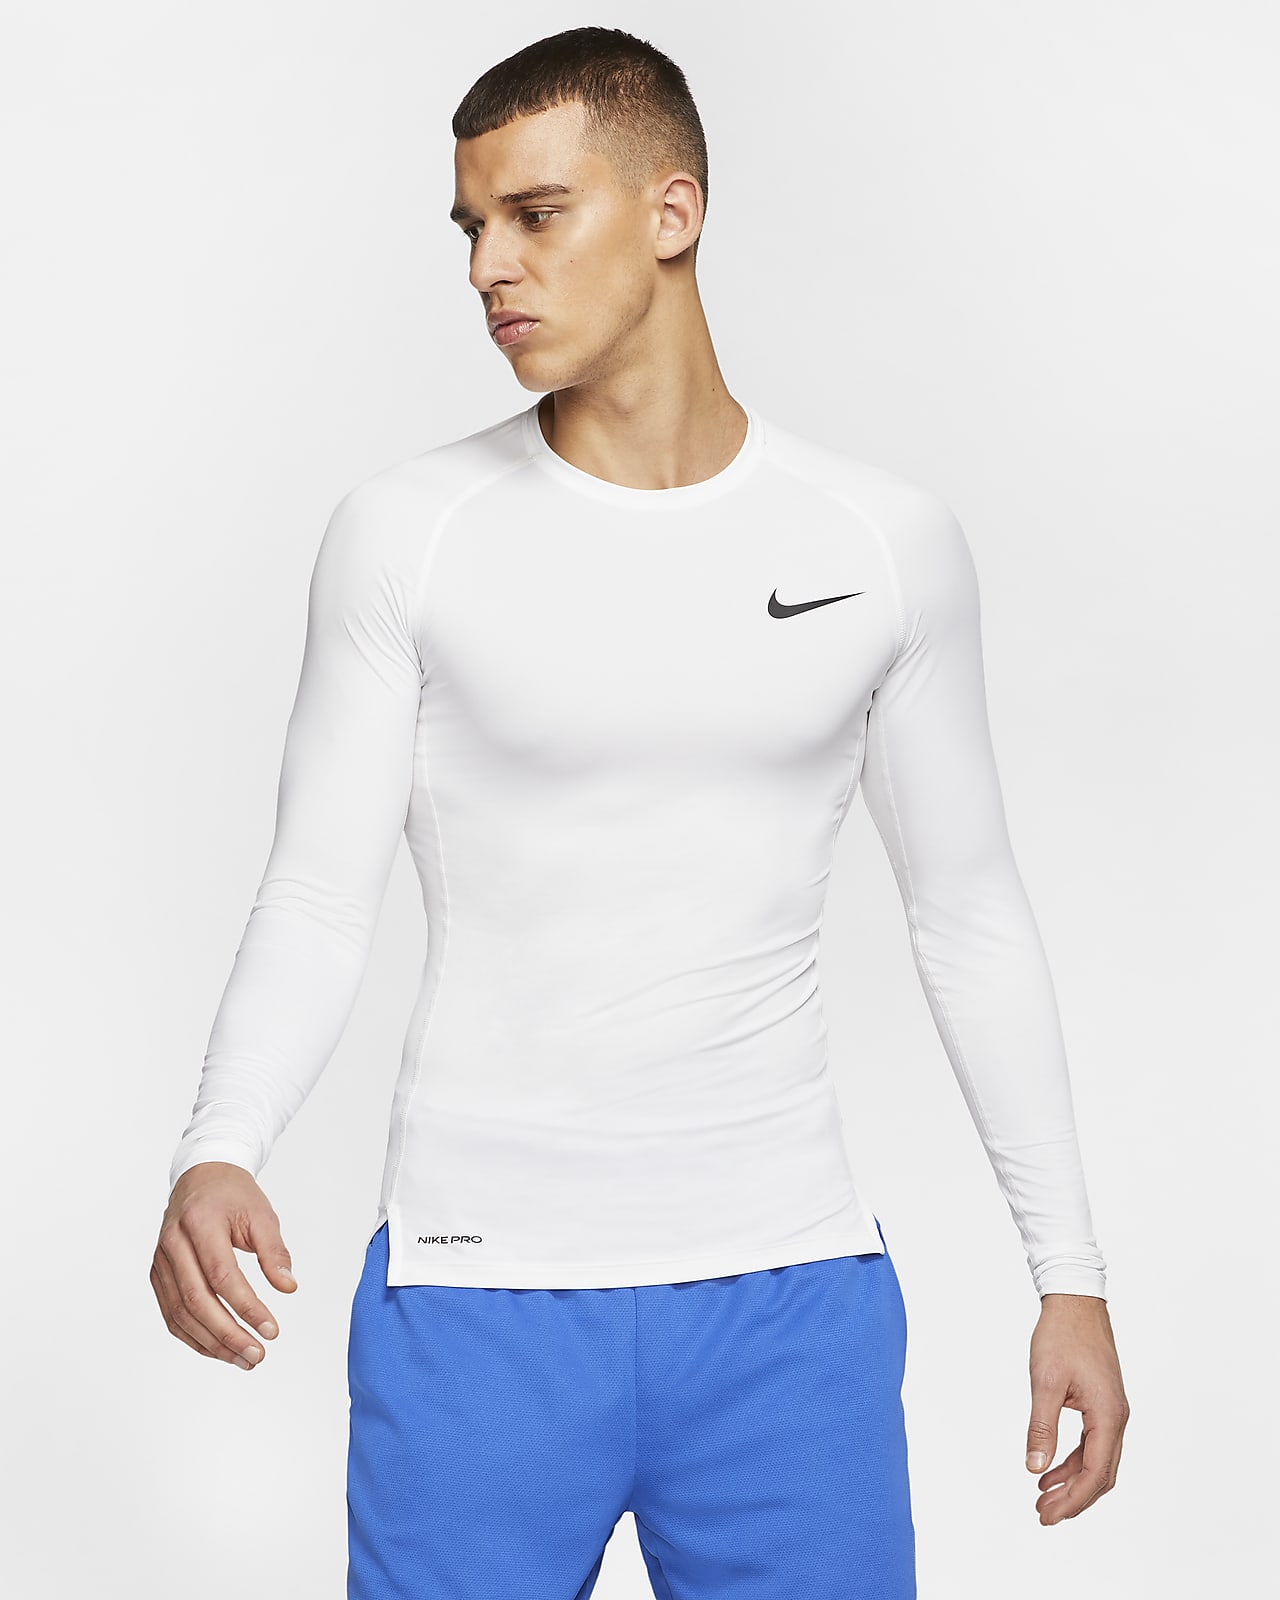 Nike Pro Men's Tight-Fit Long-Sleeve Top